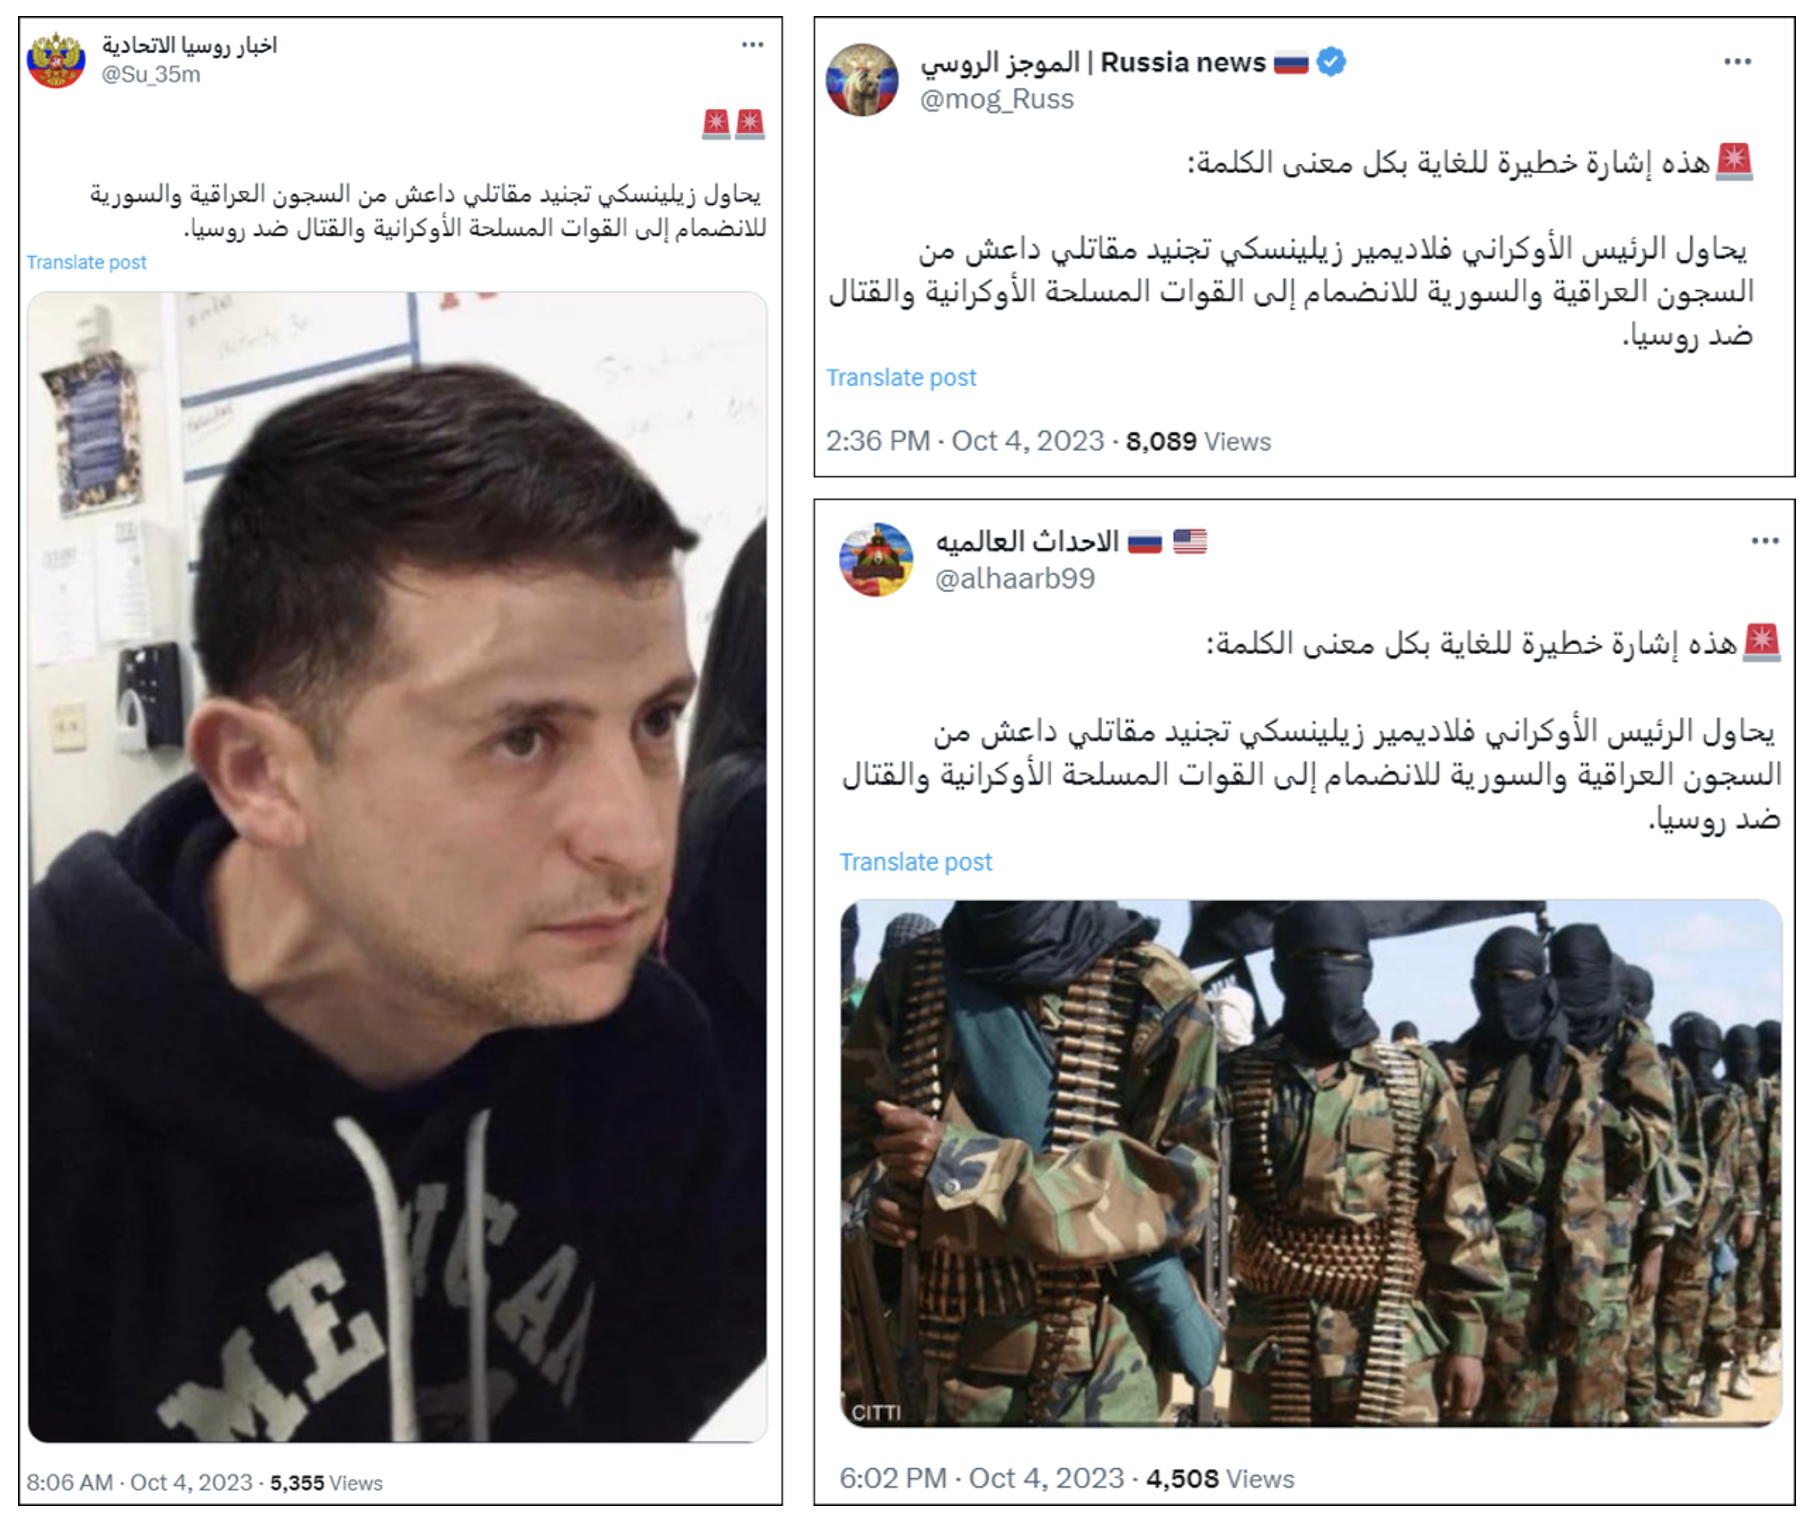 Screenshots showing identical or almost identical textual content posted by three X accounts falsely claiming that Ukrainian President Zelenskyy was trying to recruit Islamic State group prisoners to fight against Russia. The image in the tweet at left reuses a popular meme, inserting Zelenskyy’s face over the original. (Source: @Su_3m, left; @mog_Russ, top right; @alhaarb99, bottom right)